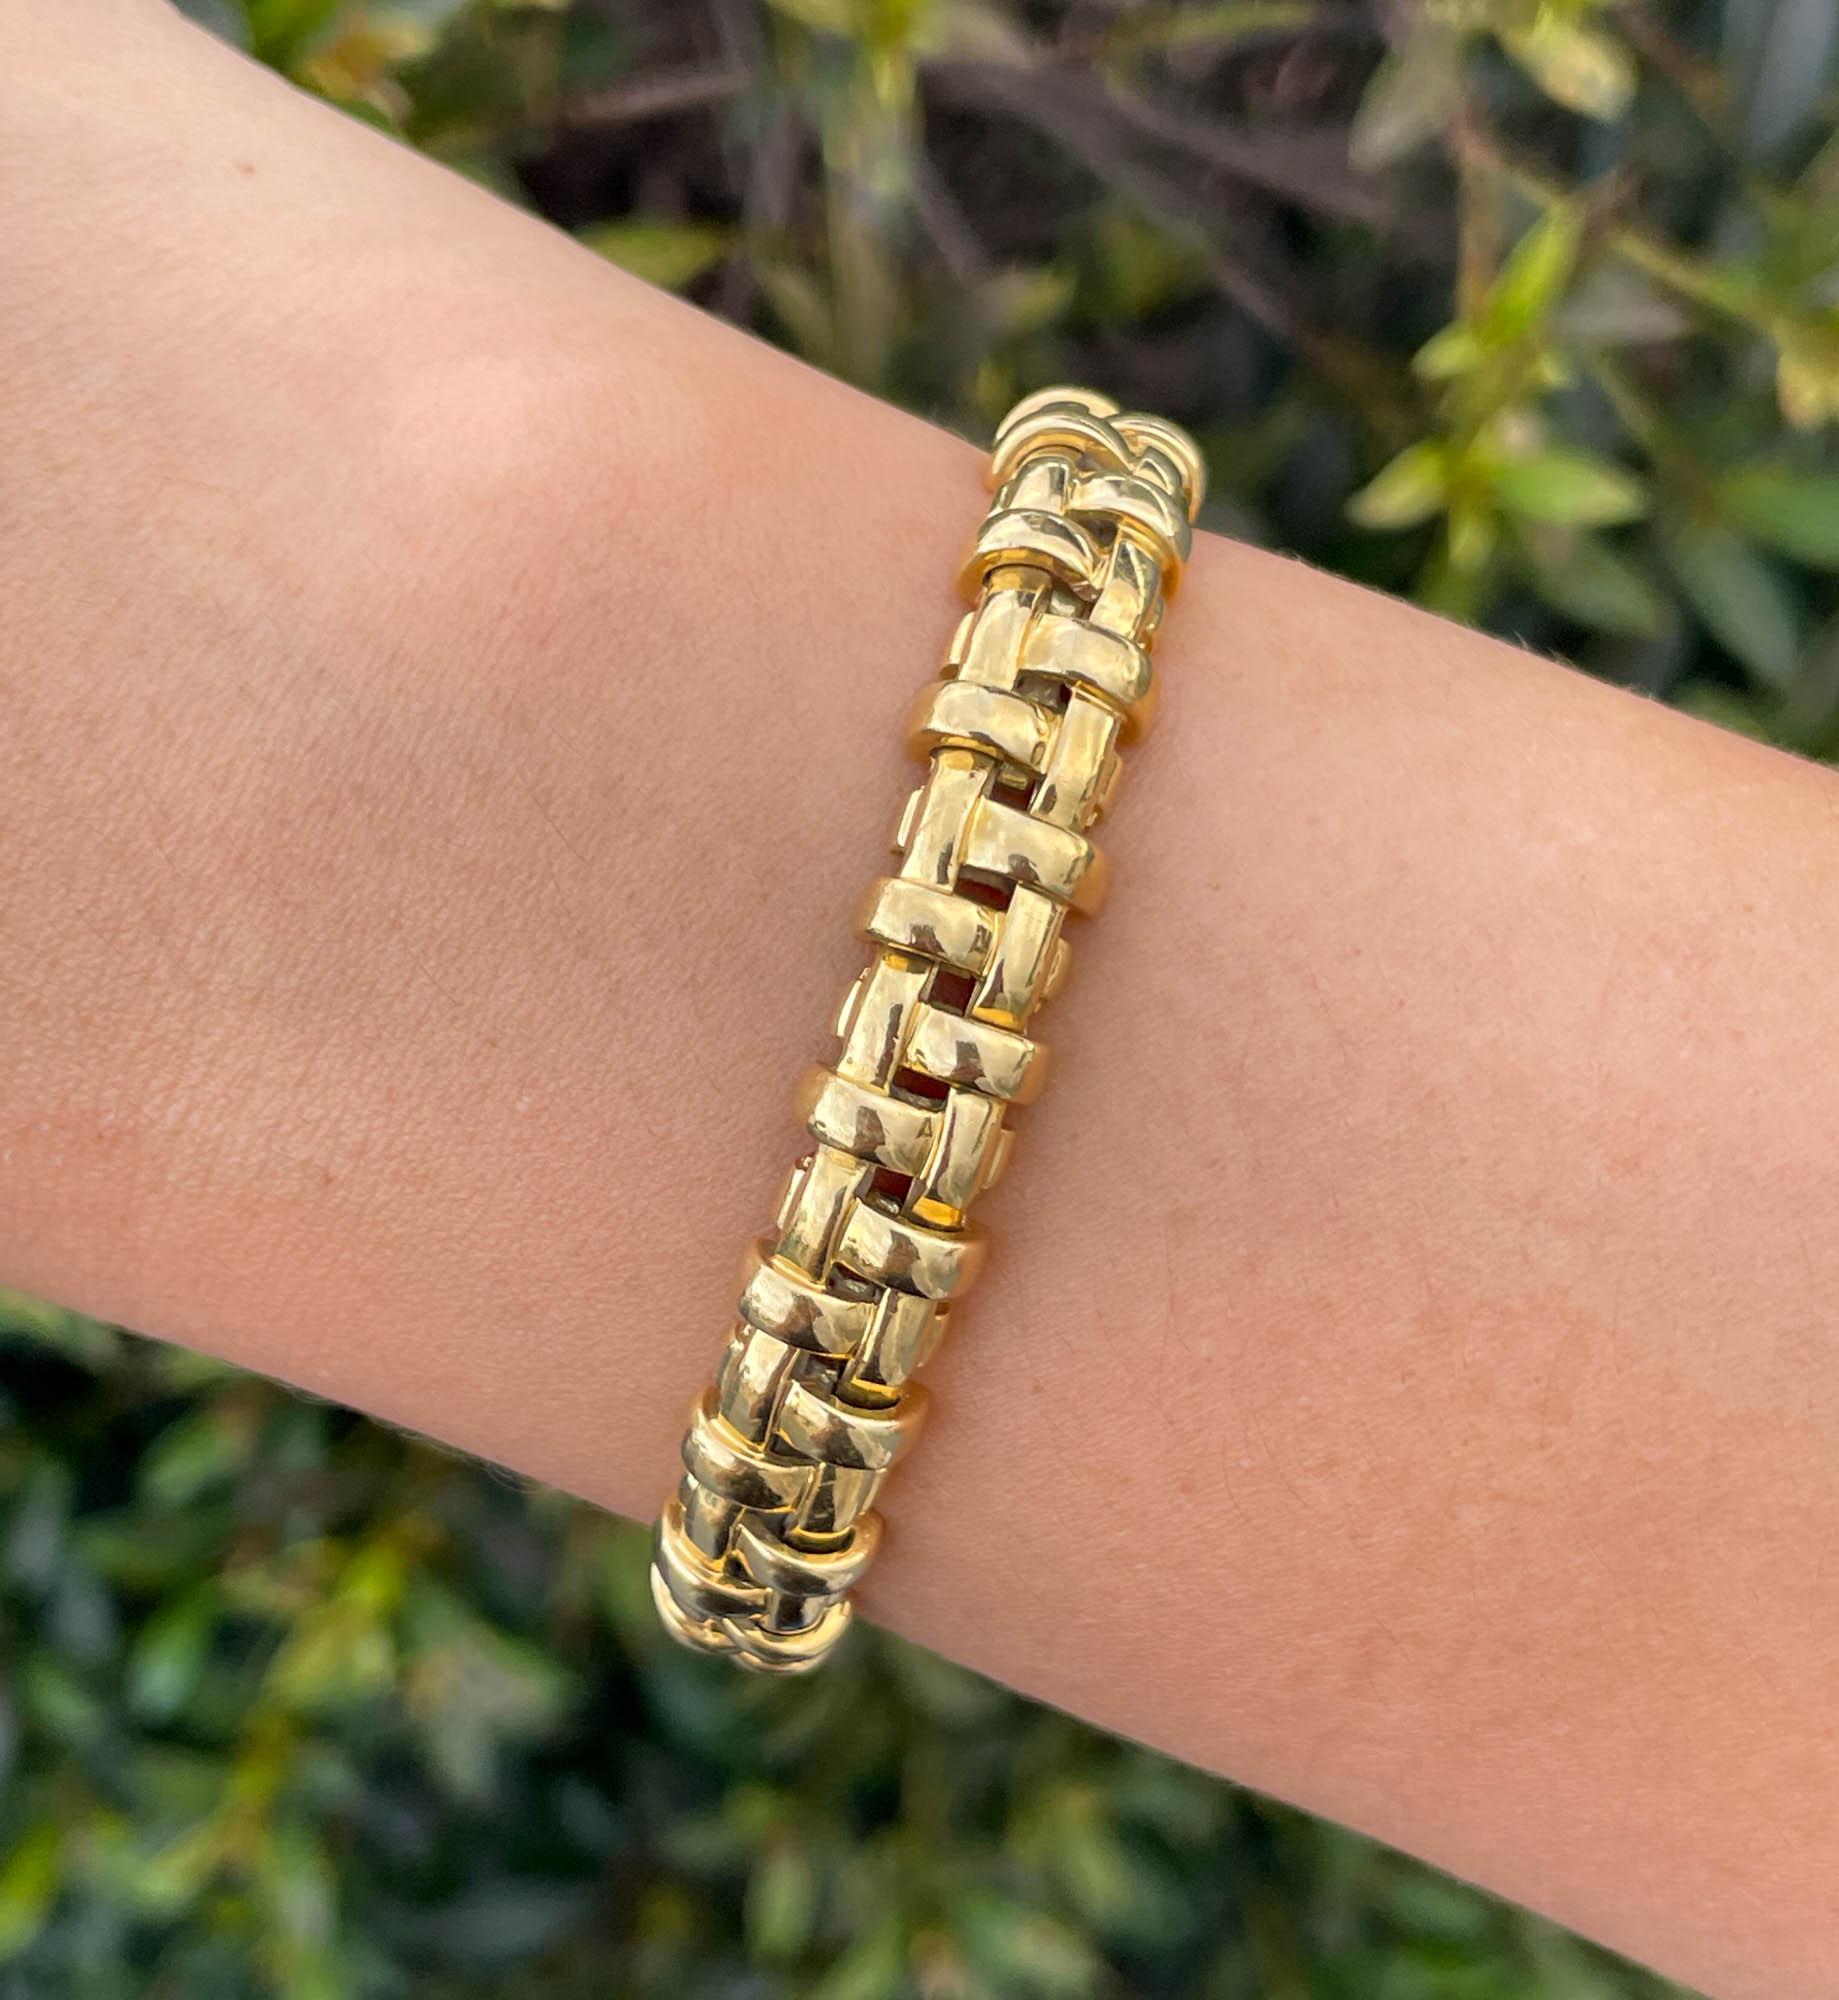 Tiffany & Co Vanerie 18k Yellow Gold Bracelet 
The bracelet is 7 inches long and 9mm wide.
Total weight of the bracelet is 46.1 grams.
Hallmarks: 2002, T&CO, 750, ITALY.

Please view our photos and videos for more details.

Comes with a gift box